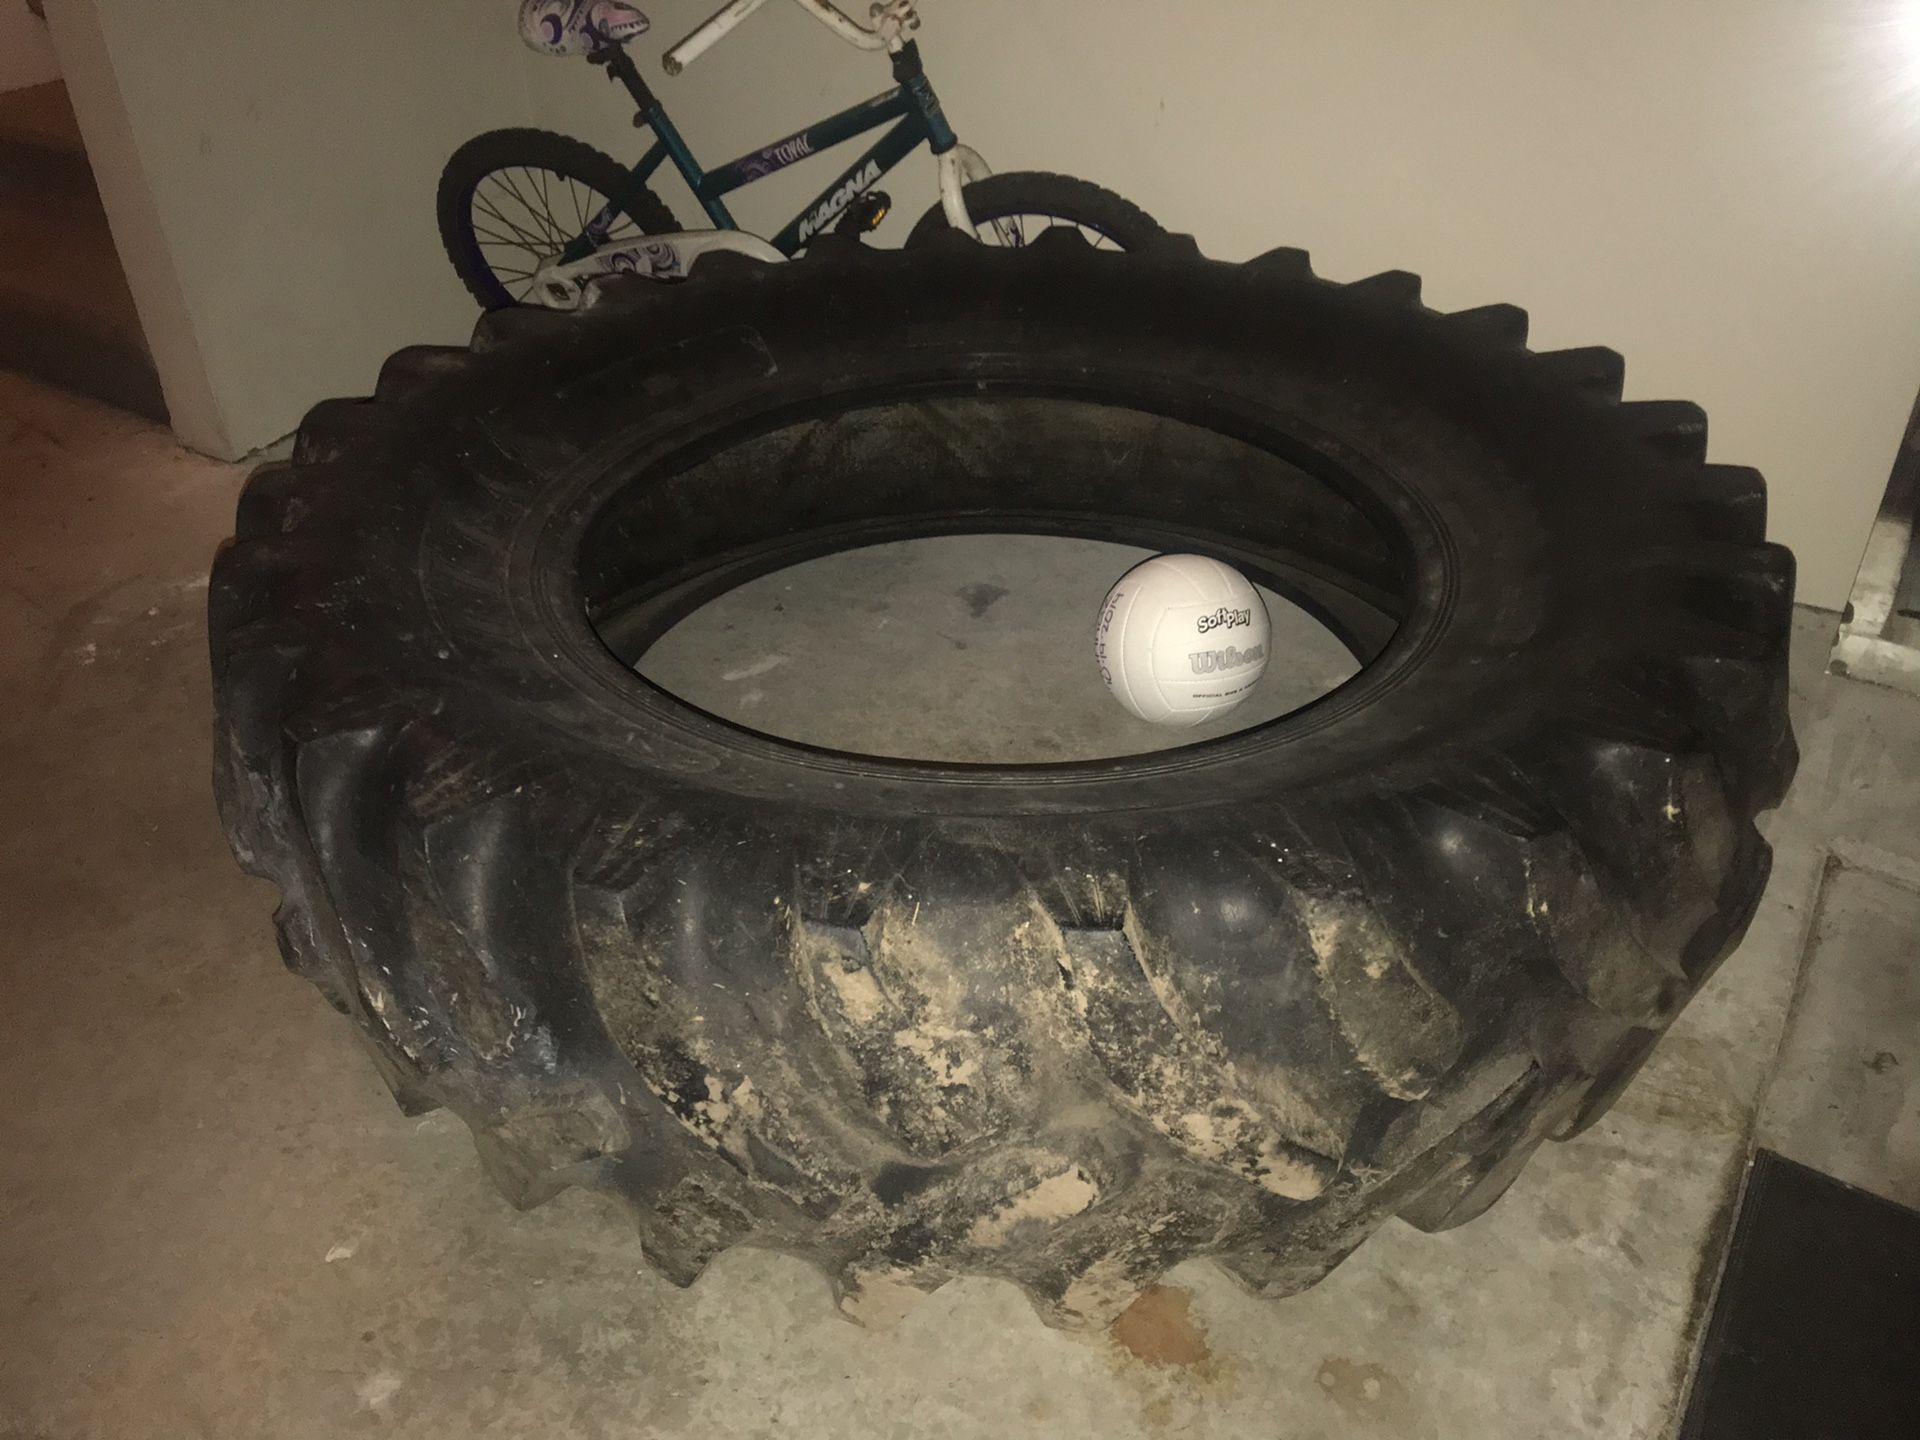 CrossFit / workout tire